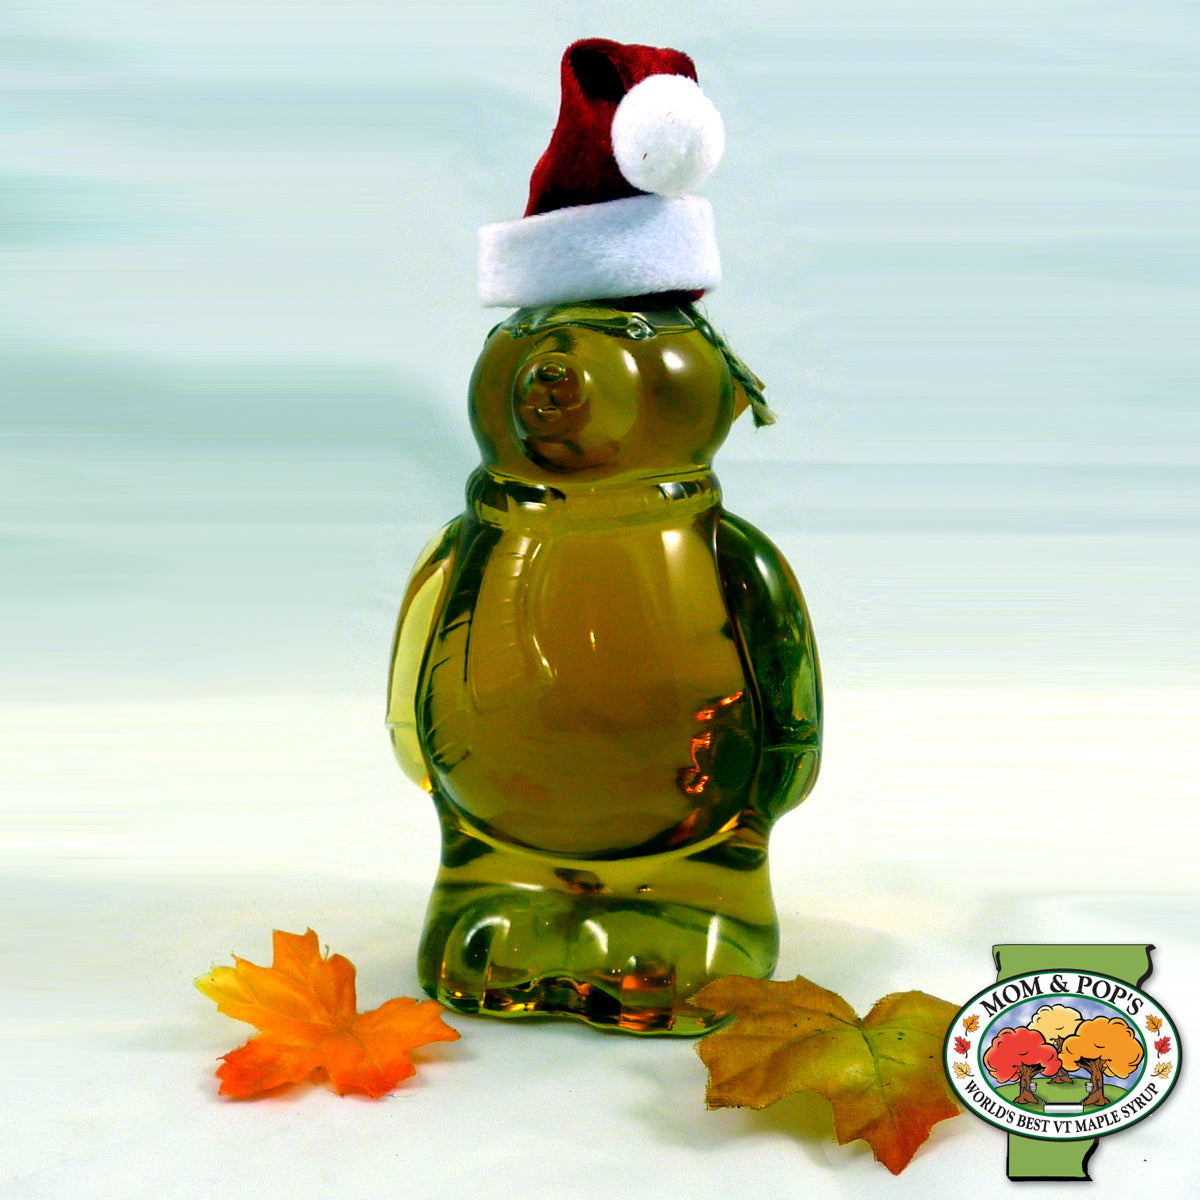 A polar bear-shaped bottle of Vermont maple syrup